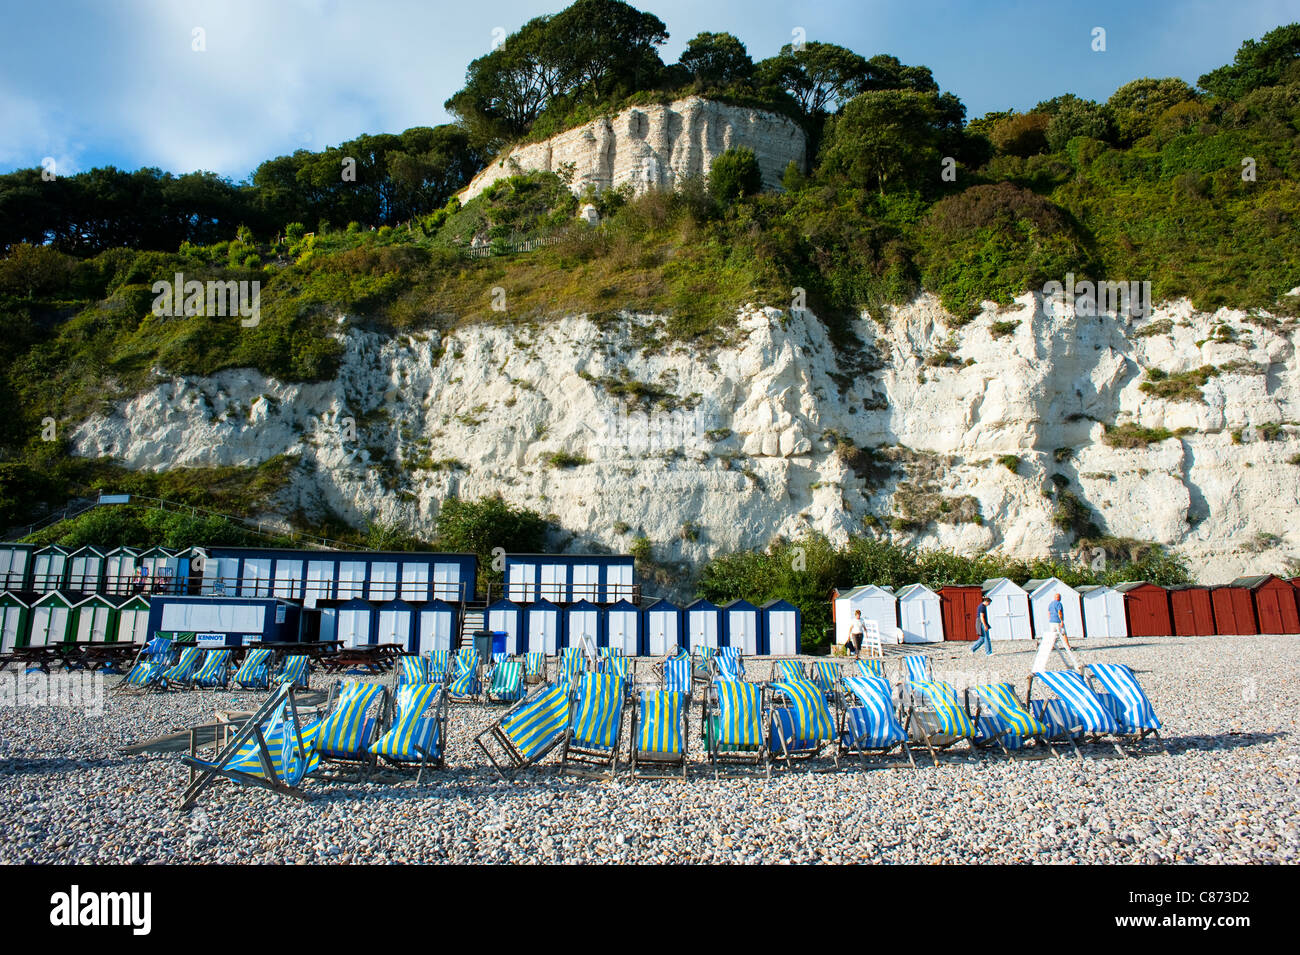 Deck chairs and beach huts at Beer, Devon, England Stock Photo